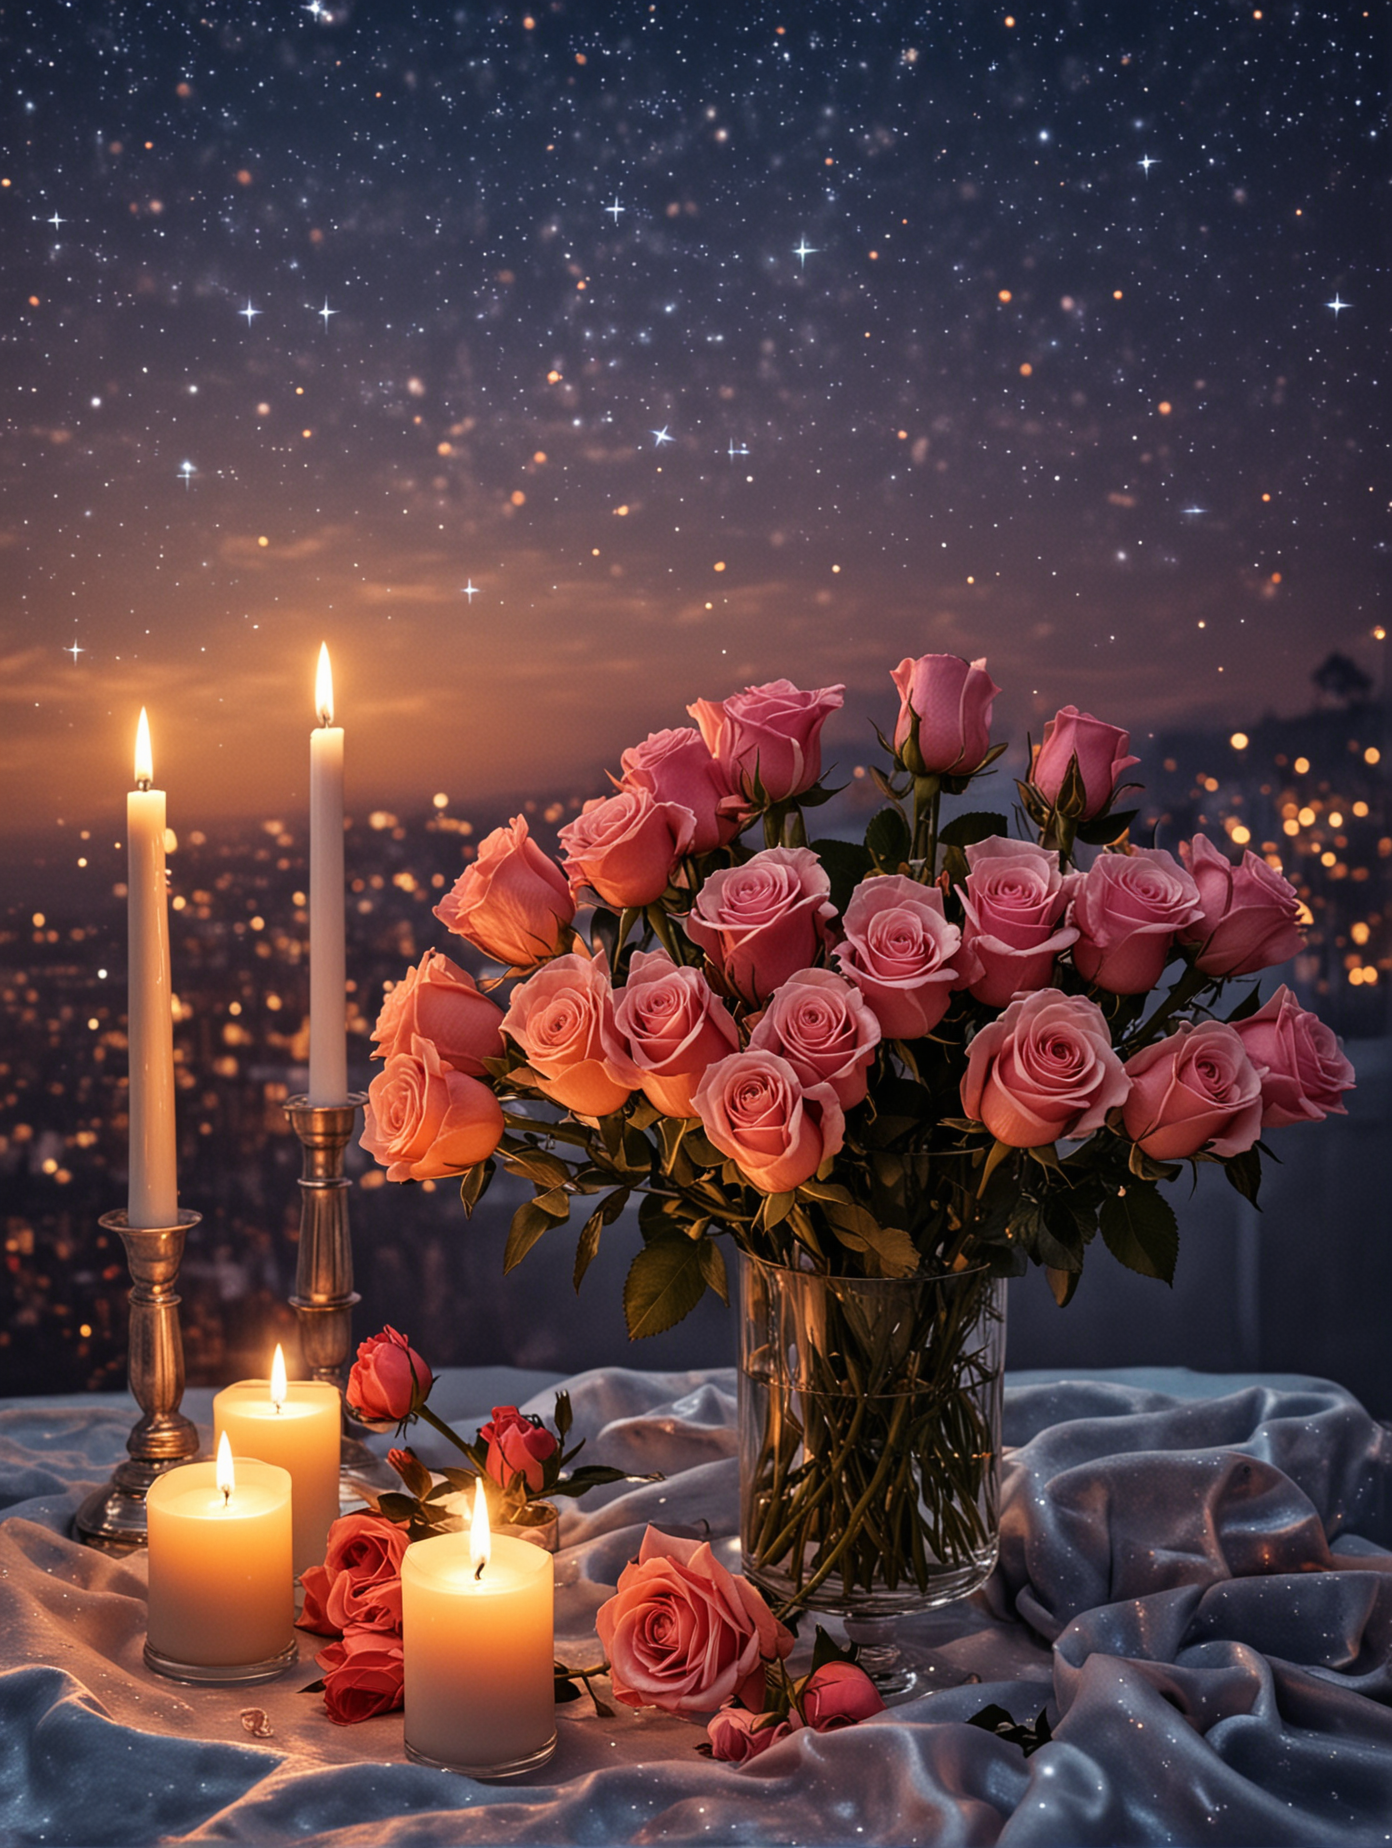 Evening, starry sky, candles, roses, flowers